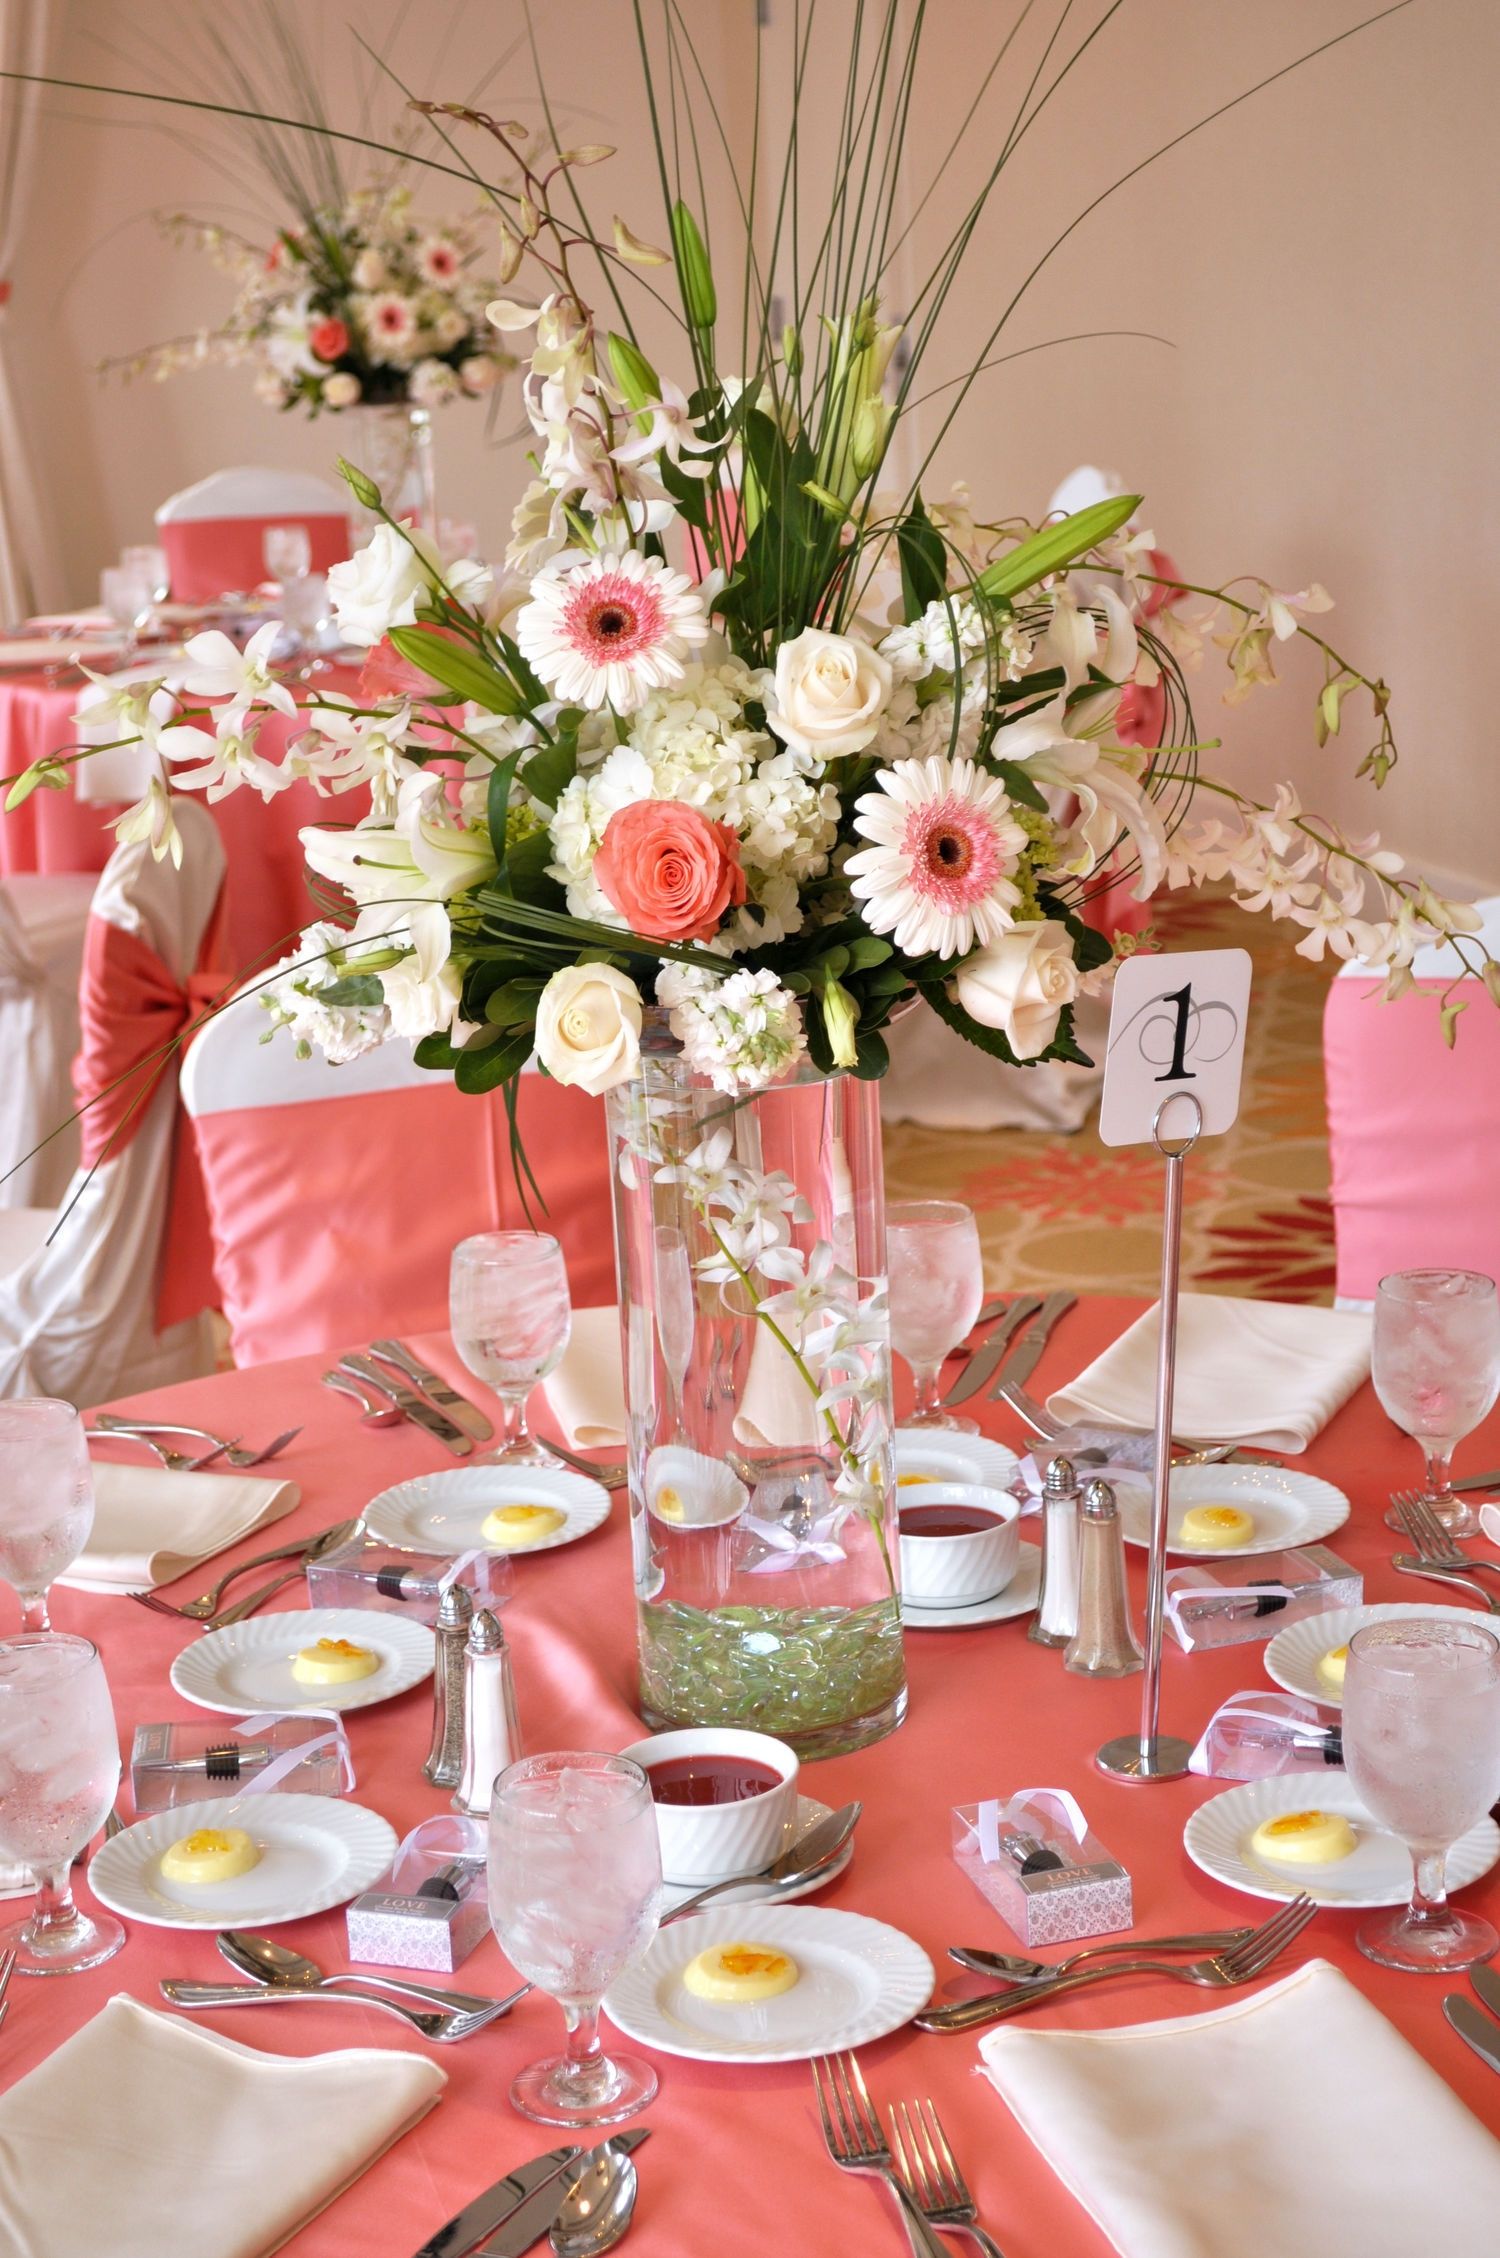 How To Choose The Right Wedding Centerpieces For Round Table? #1122